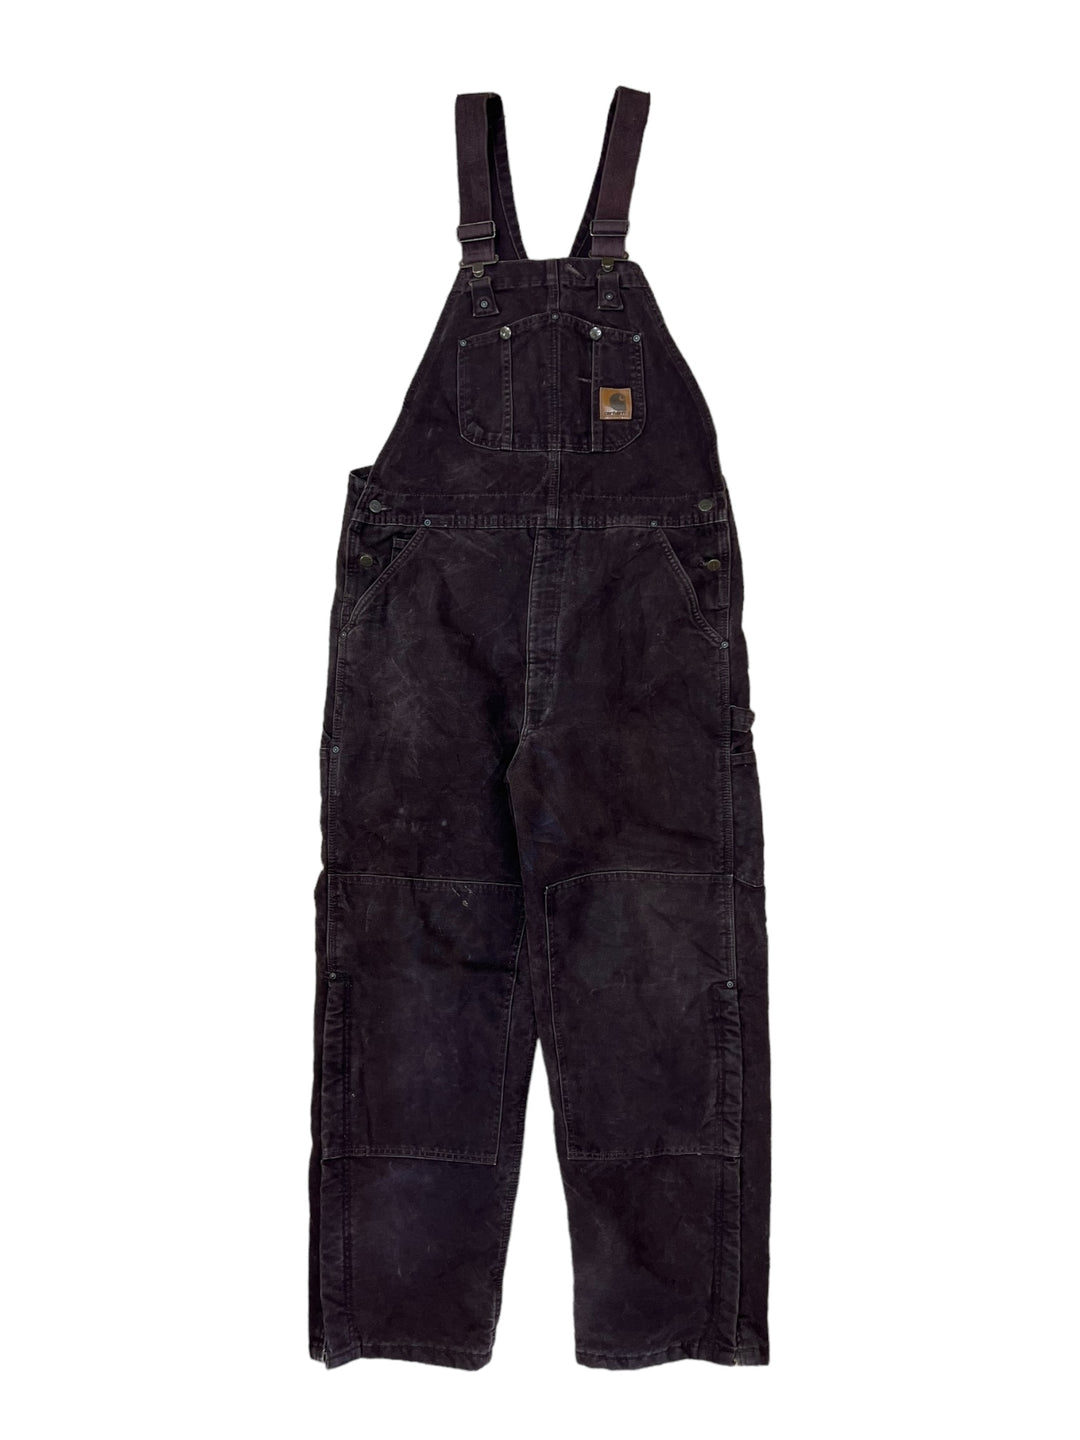 Carhartt 90’s USA double knee brown overalls men’s extra large